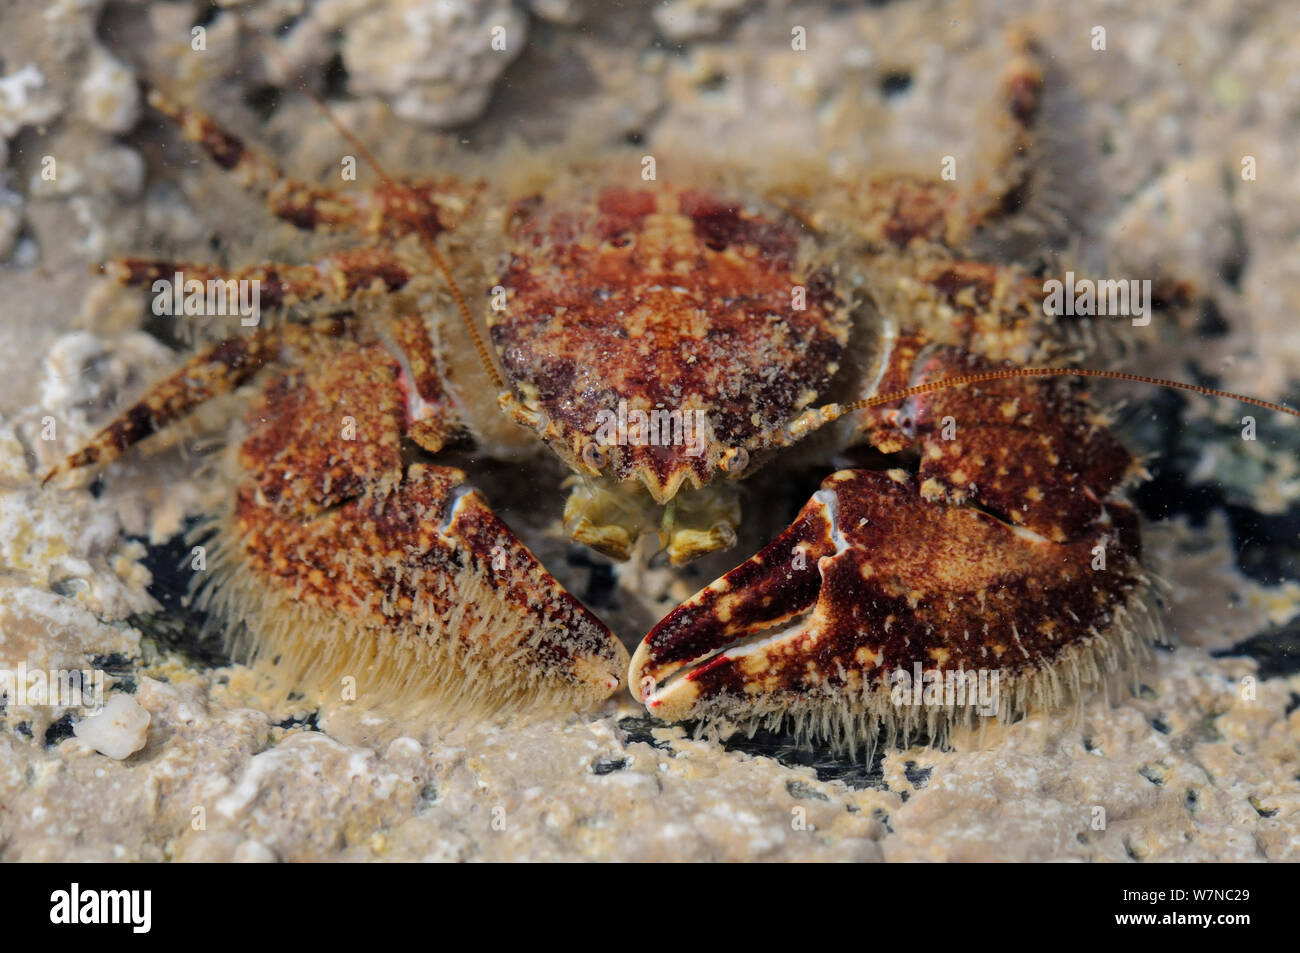 Broad-clawed porcelain crab (Porcellana platycheles) among encrusting red algae (Lithothamnion sp.) in a rockpool, near Falmouth, Cornwall, UK, August. Stock Photo